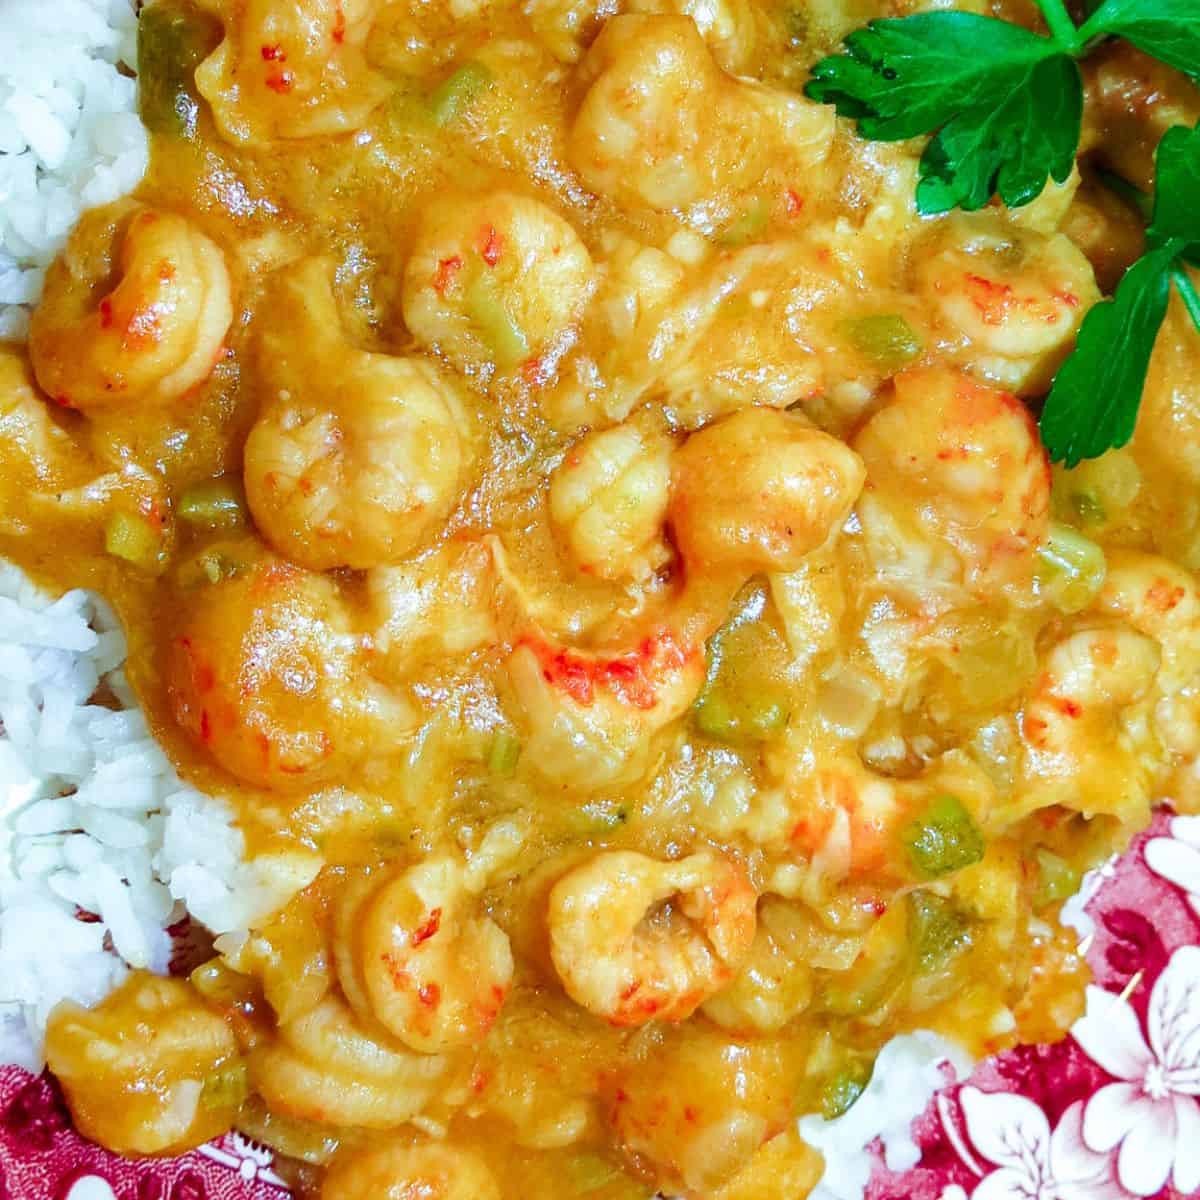 A serving of Crawfish Étouffée on white rice.